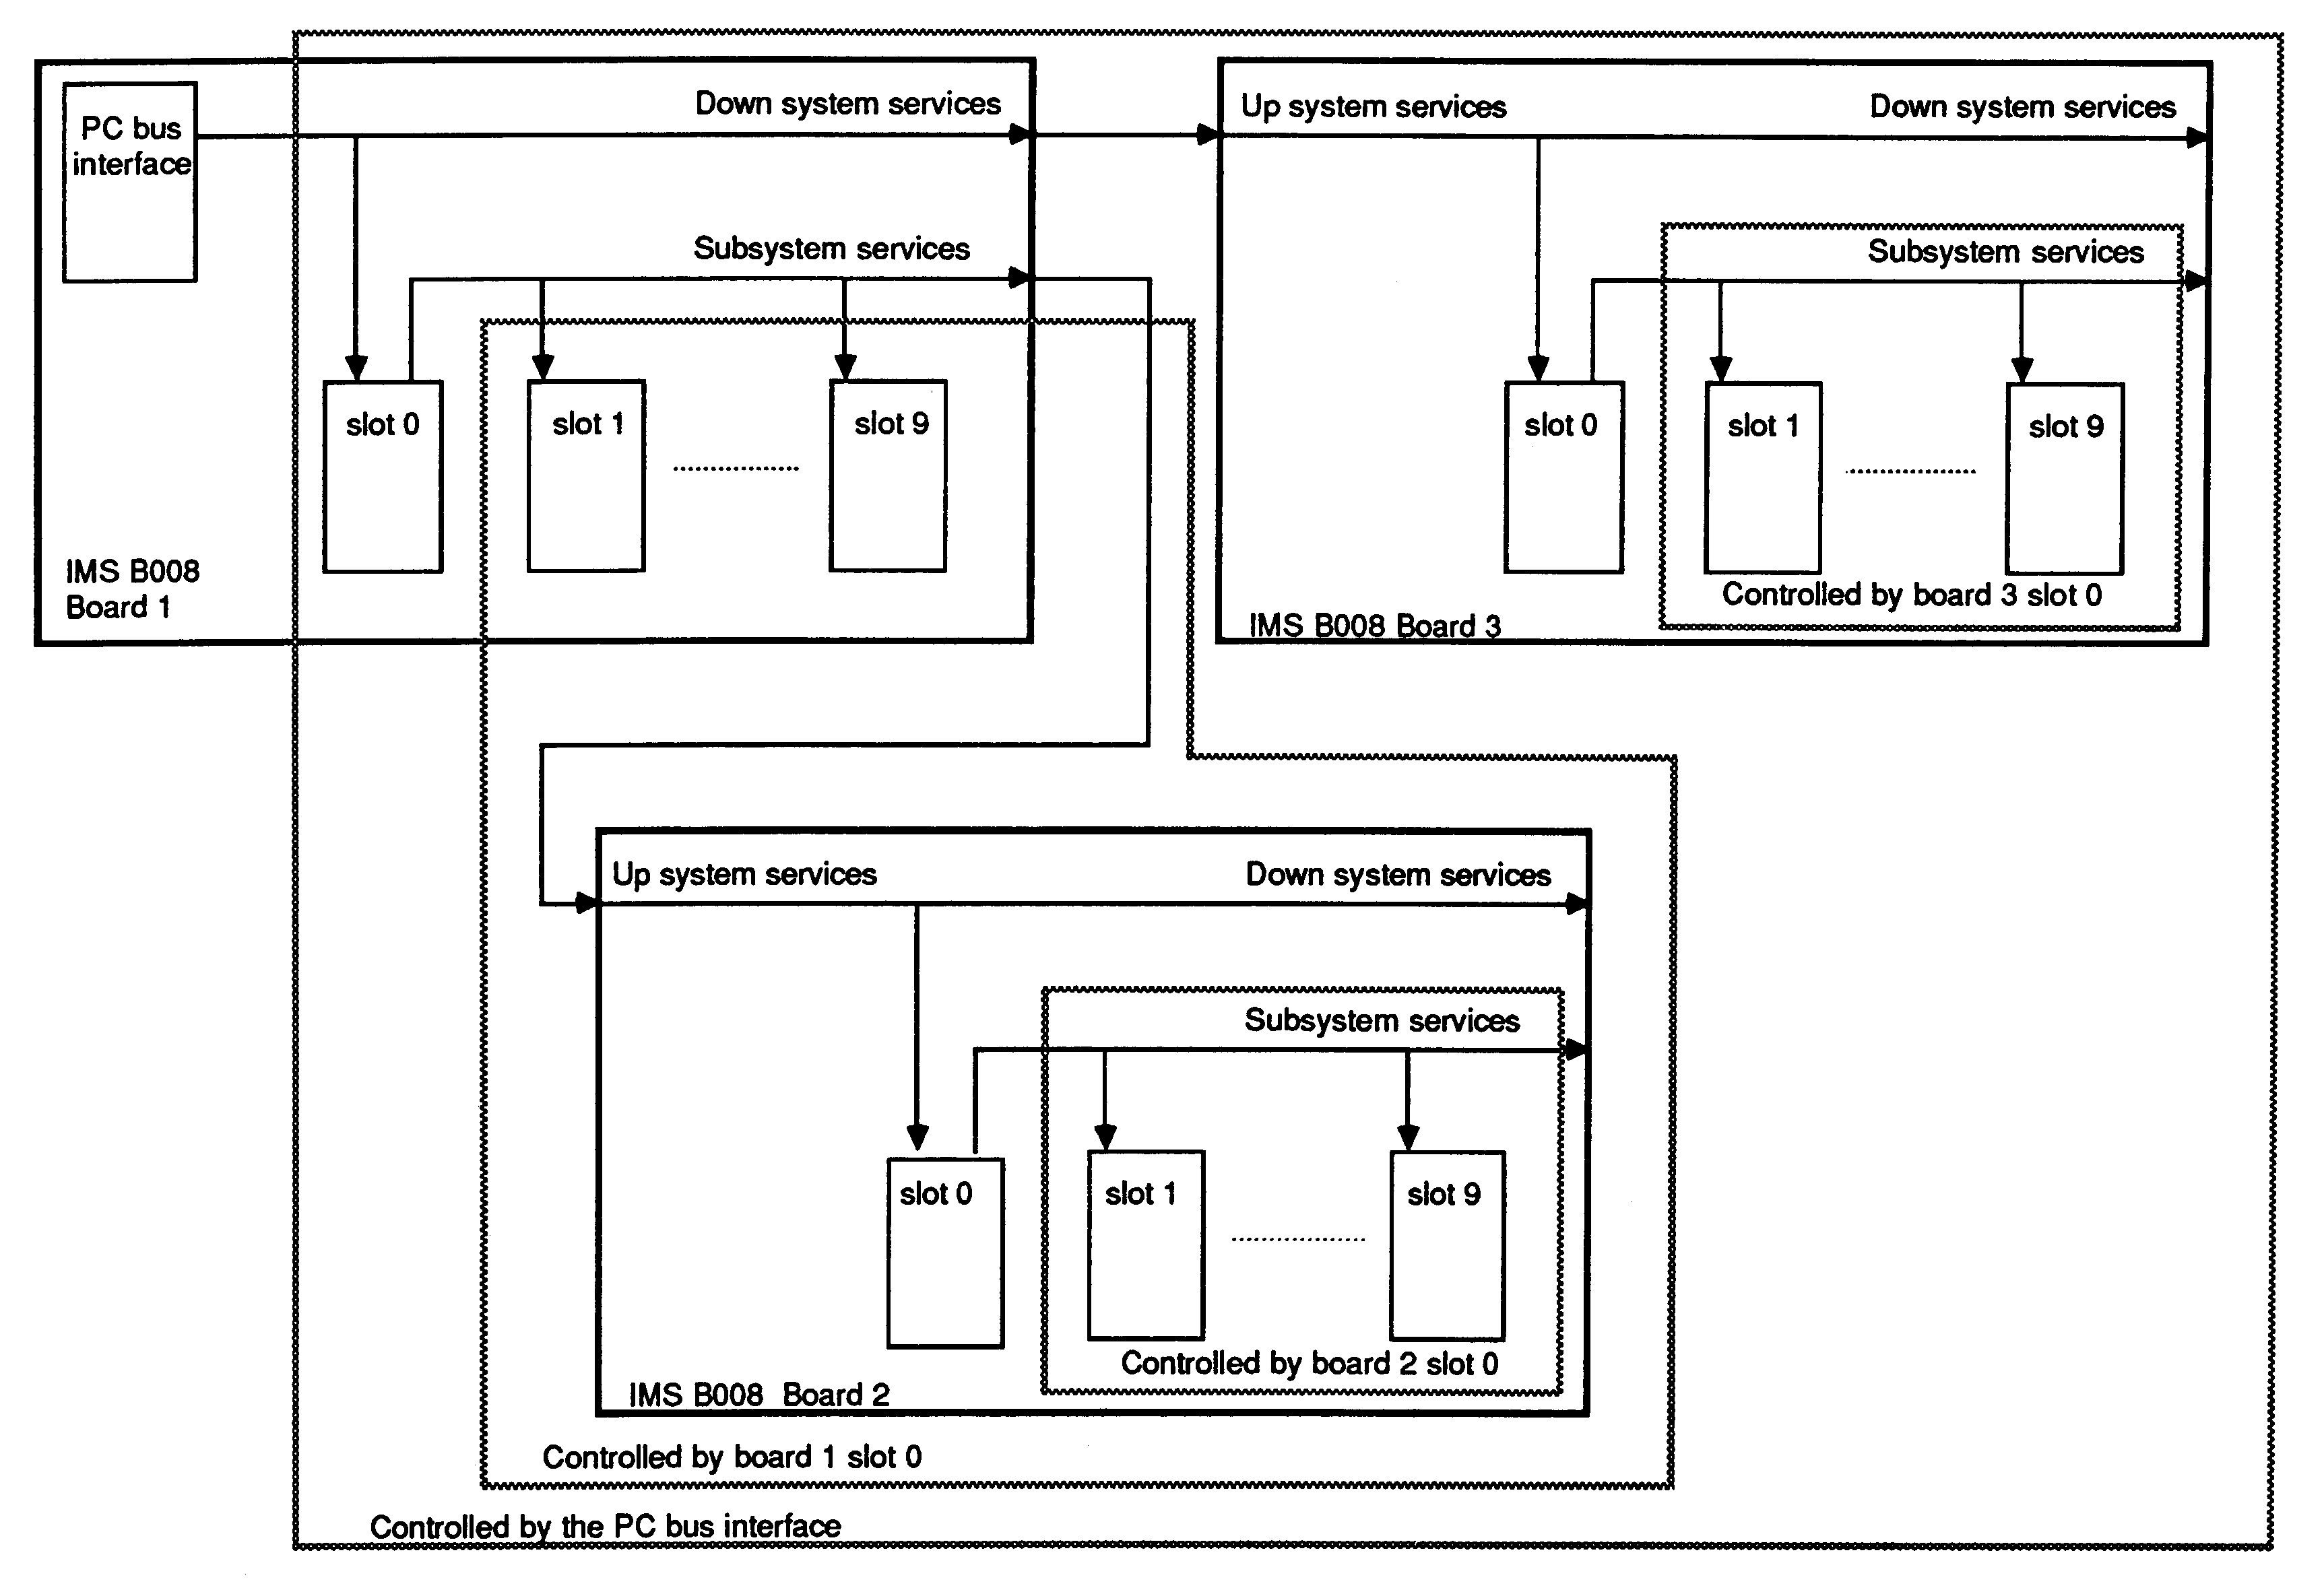 Examples of hierarchy between TRAMs and between motherboards